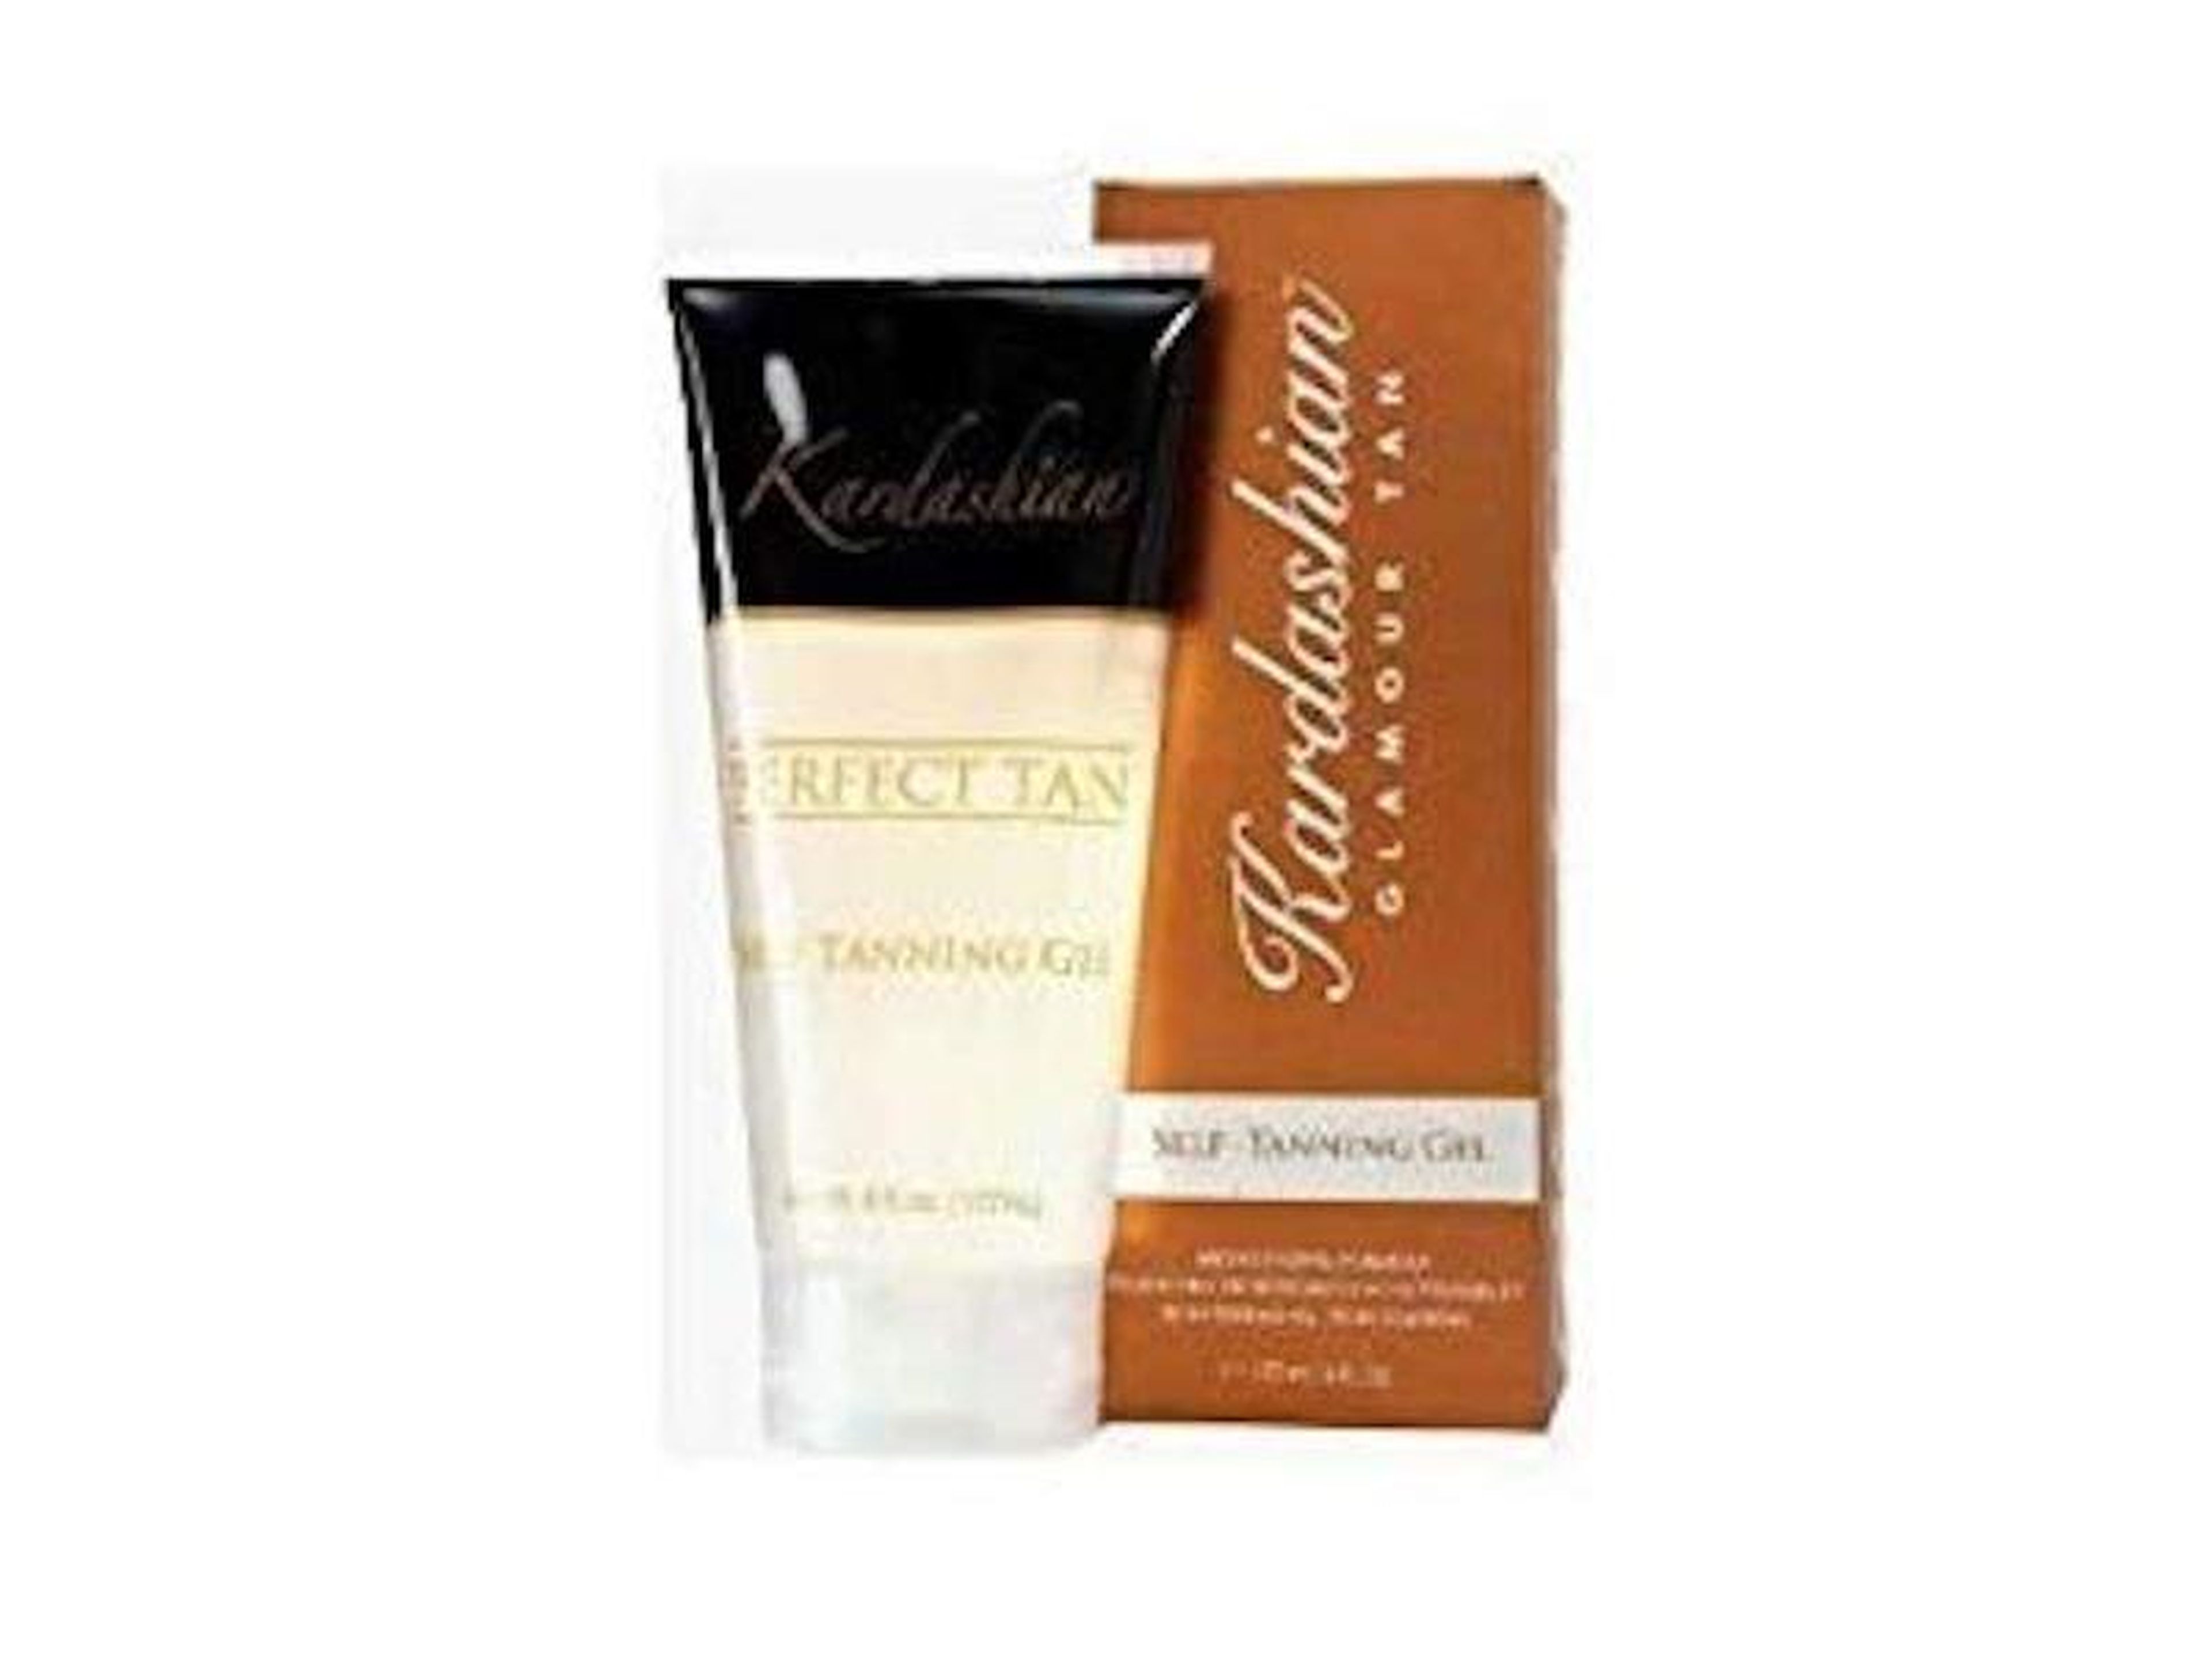 Kardashian Glamour Tan was released onto the beauty market in April 2010. It's a self-tanning gel created by the three sisters and was — at the time — exclusive to Sephora and cost $34. In 2019, there was a tube going for $79 on